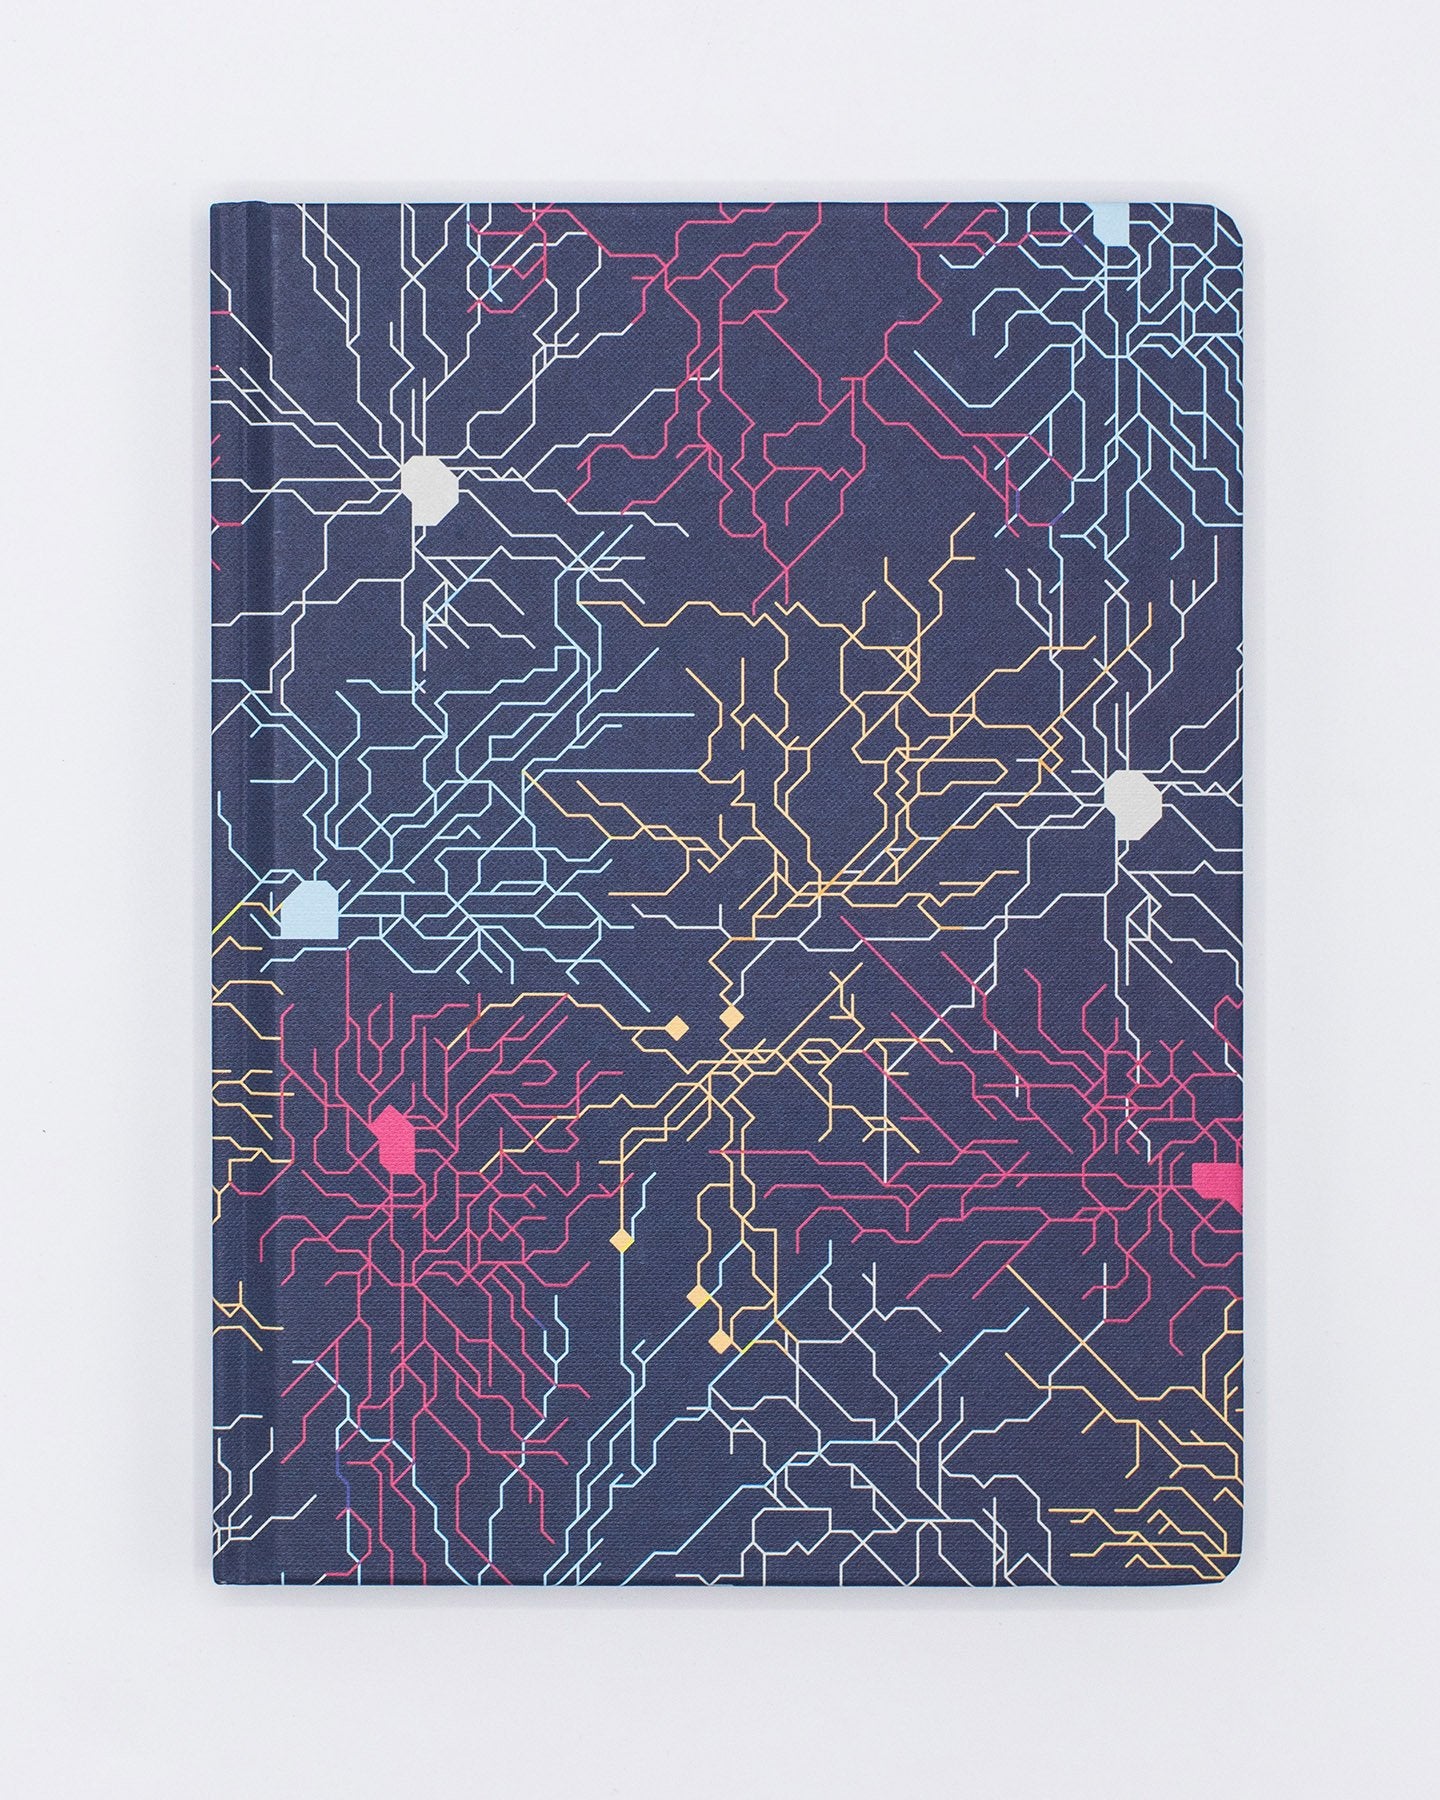 Neural Circuit Hardcover Notebook - Lined/Grid